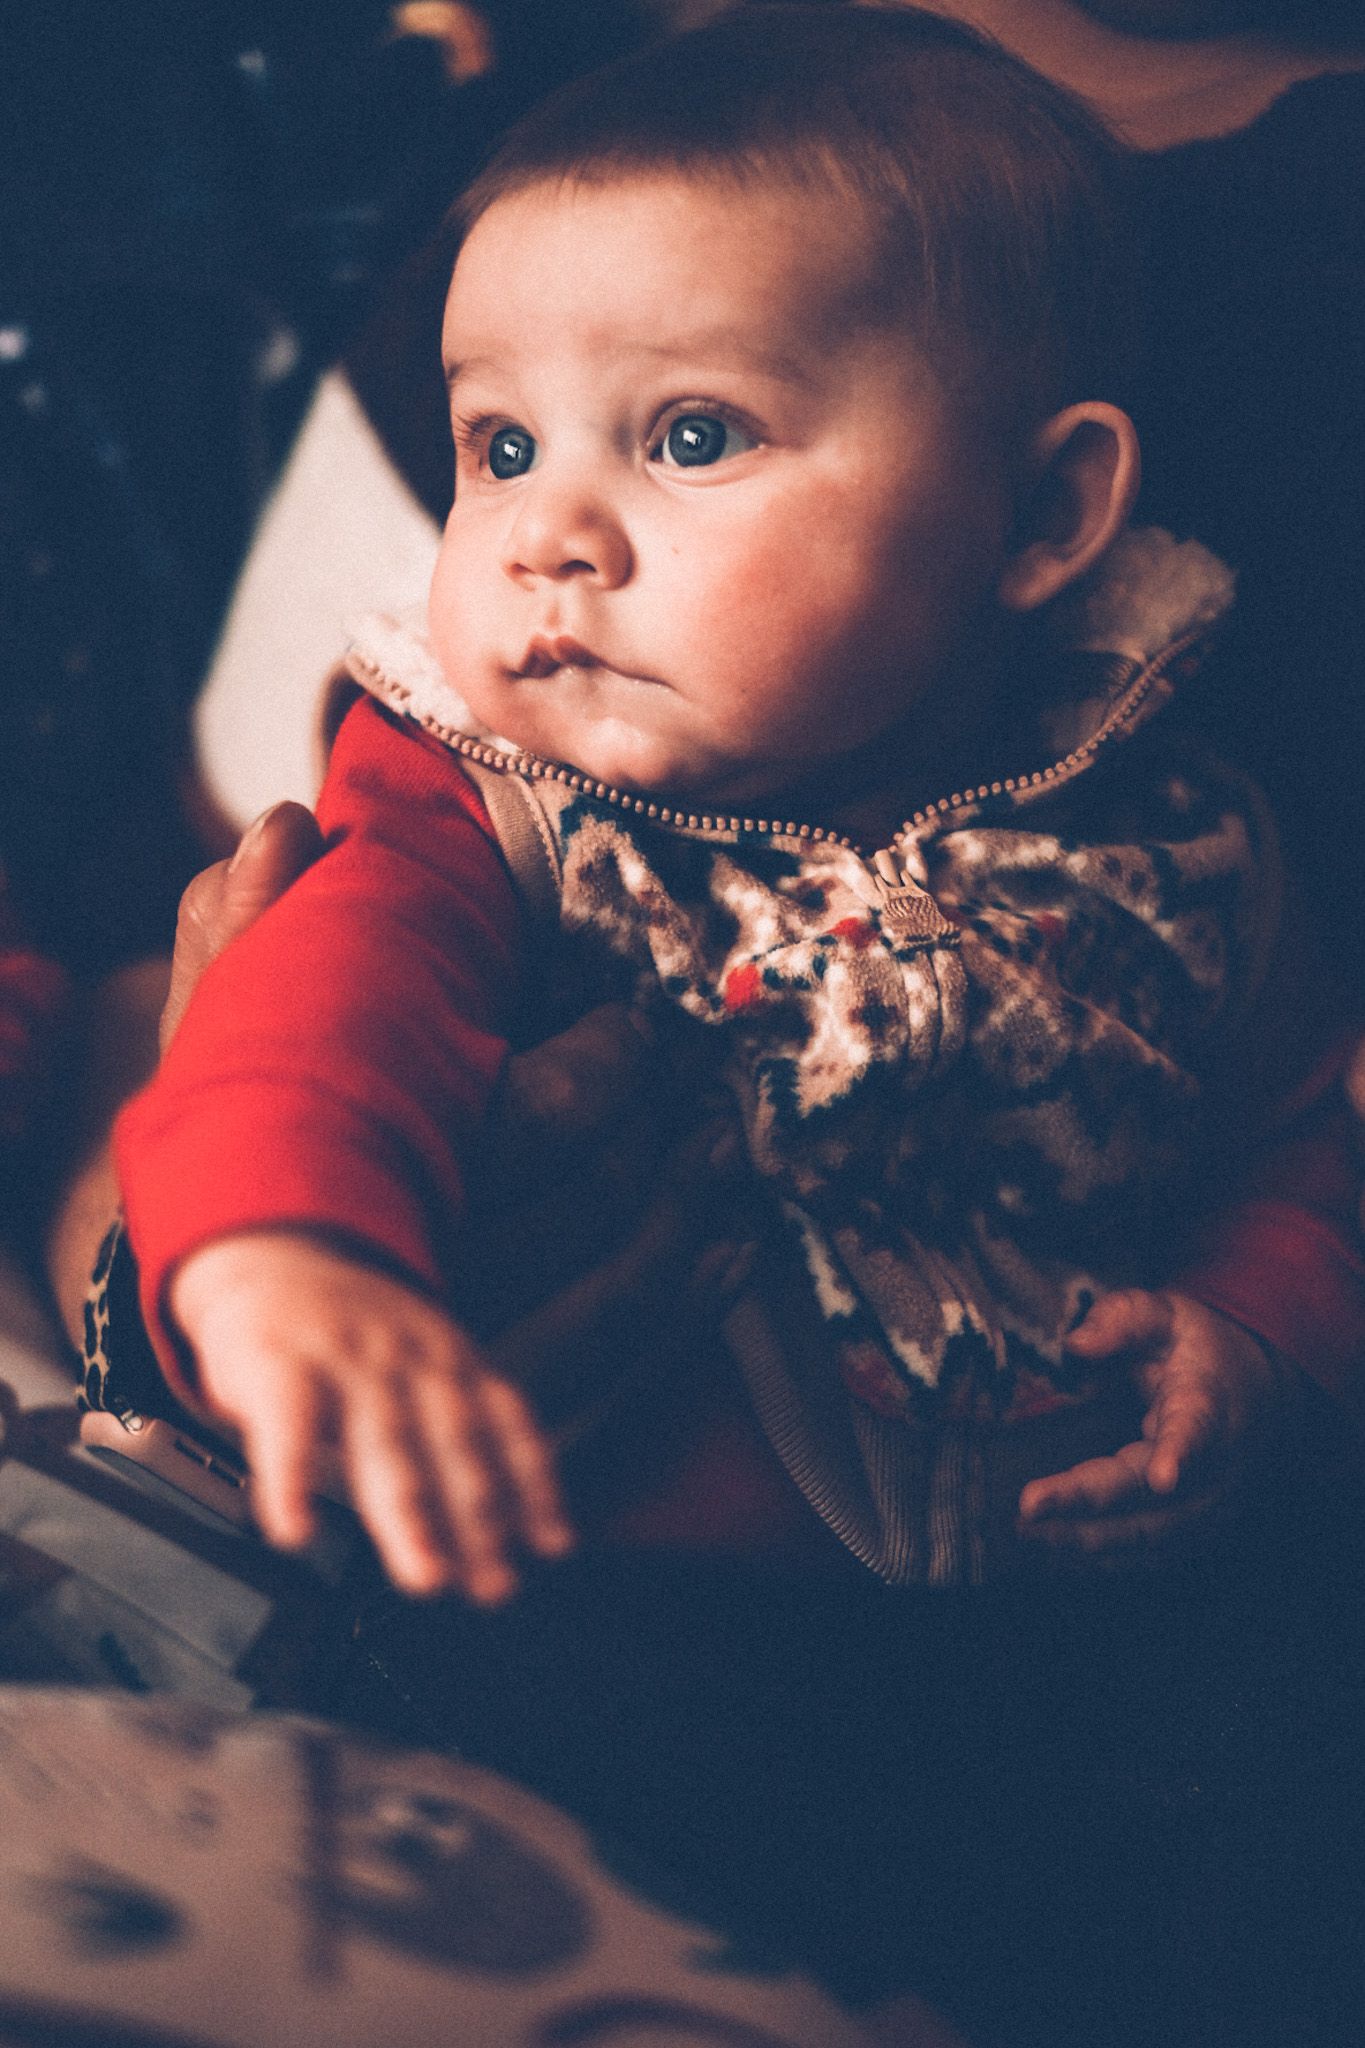 A baby boy in a festive red shirt looks off to the side, face lit in natural light.